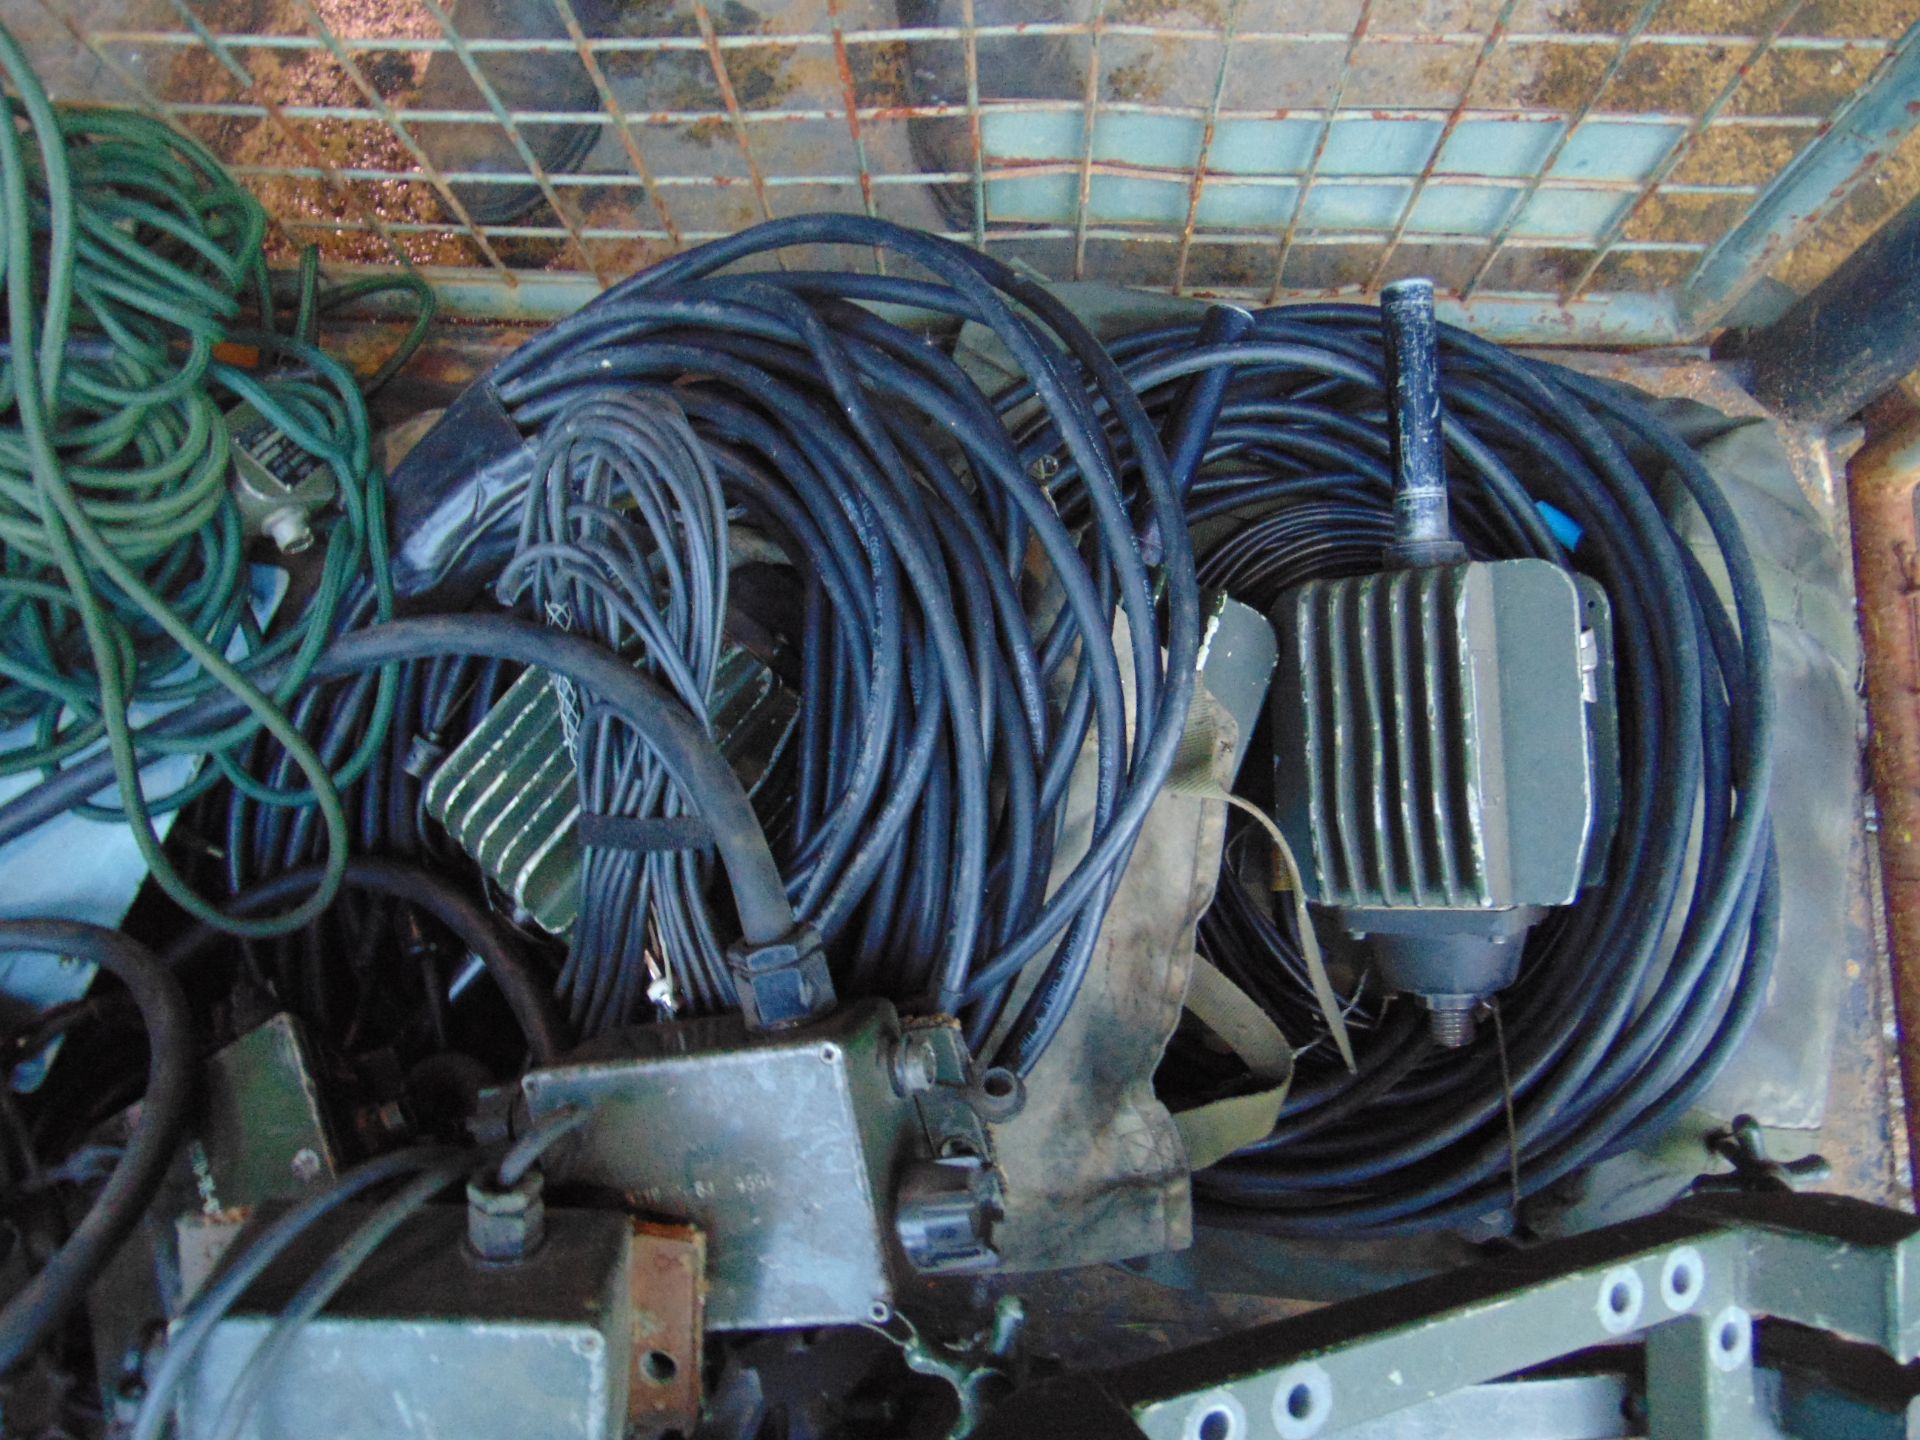 Stillage of Clansman Radio Equipment inc Headsets, Cable Antenna kits Ect - Image 7 of 7